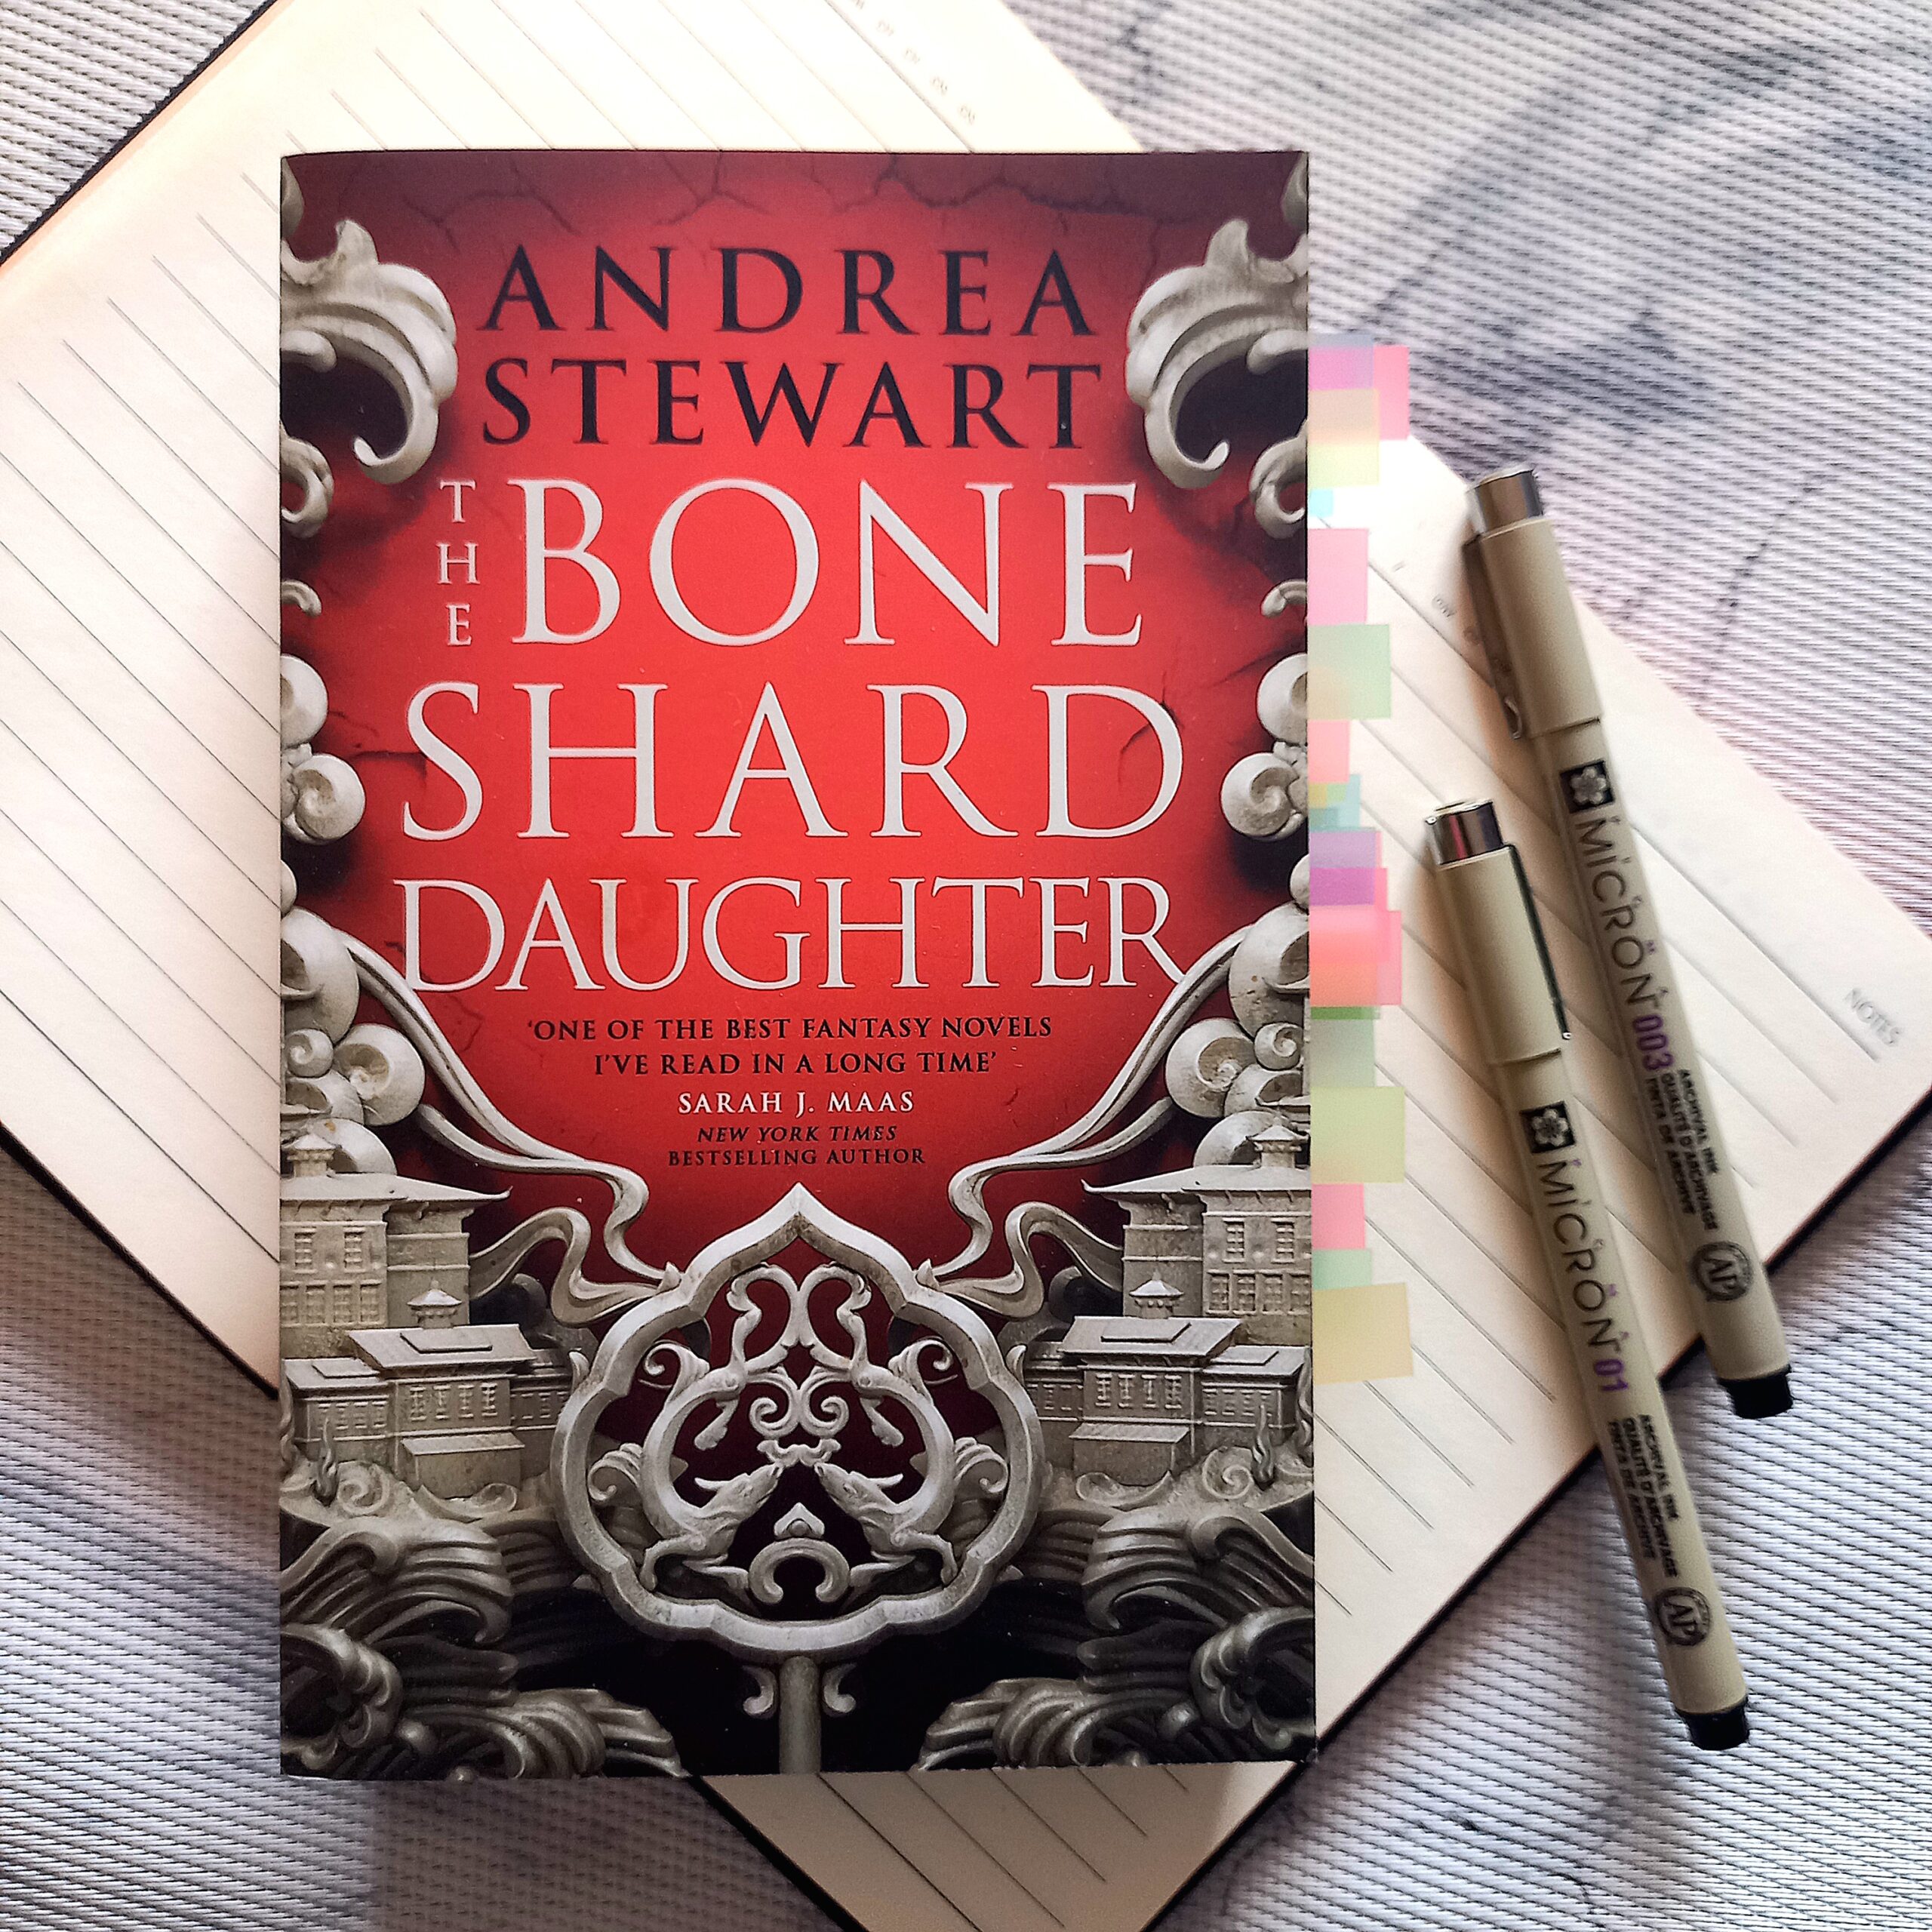 Fragments of Destiny: Reviewing Andrea Stewart’s ‘The Bone Shard Daughter’